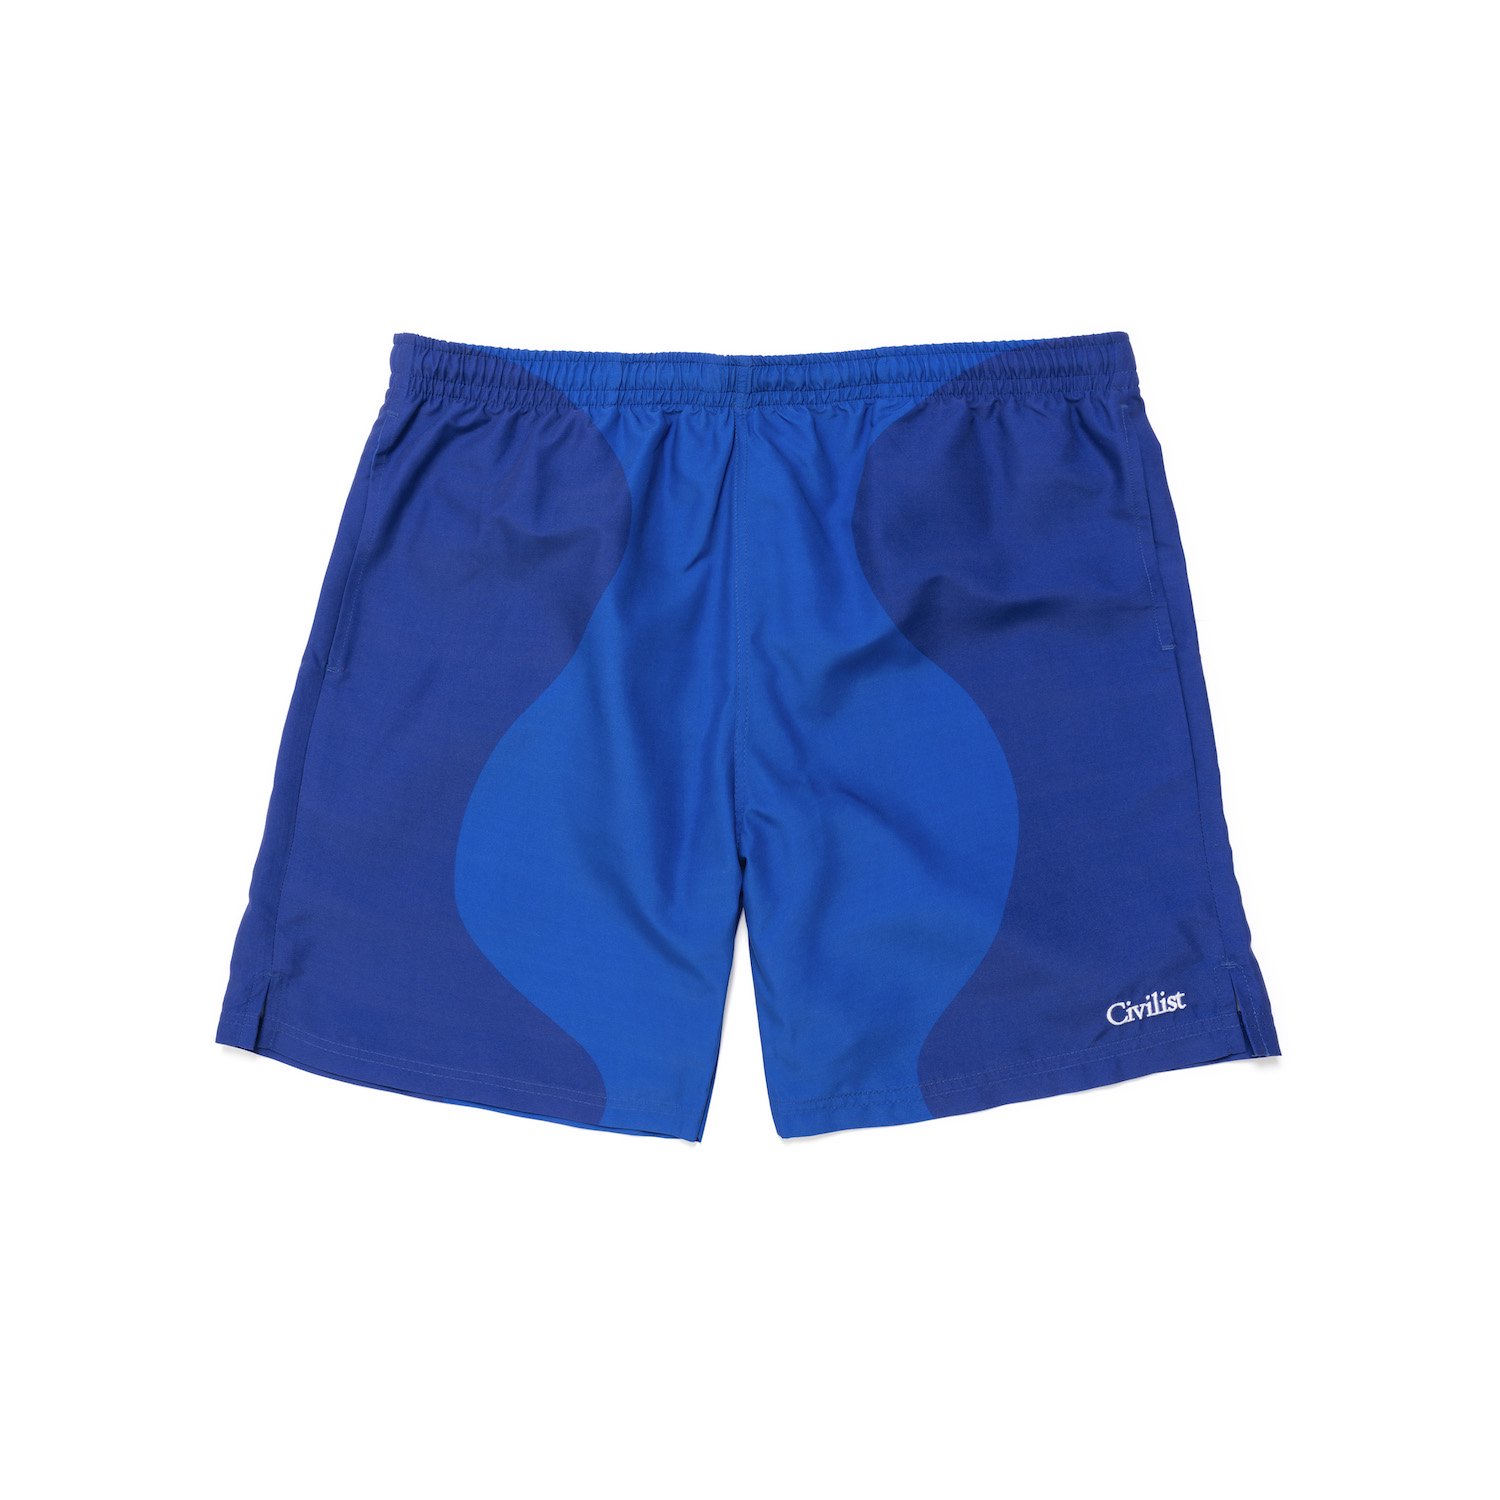 CIVILIST<br>Butterfly Shorts<br>